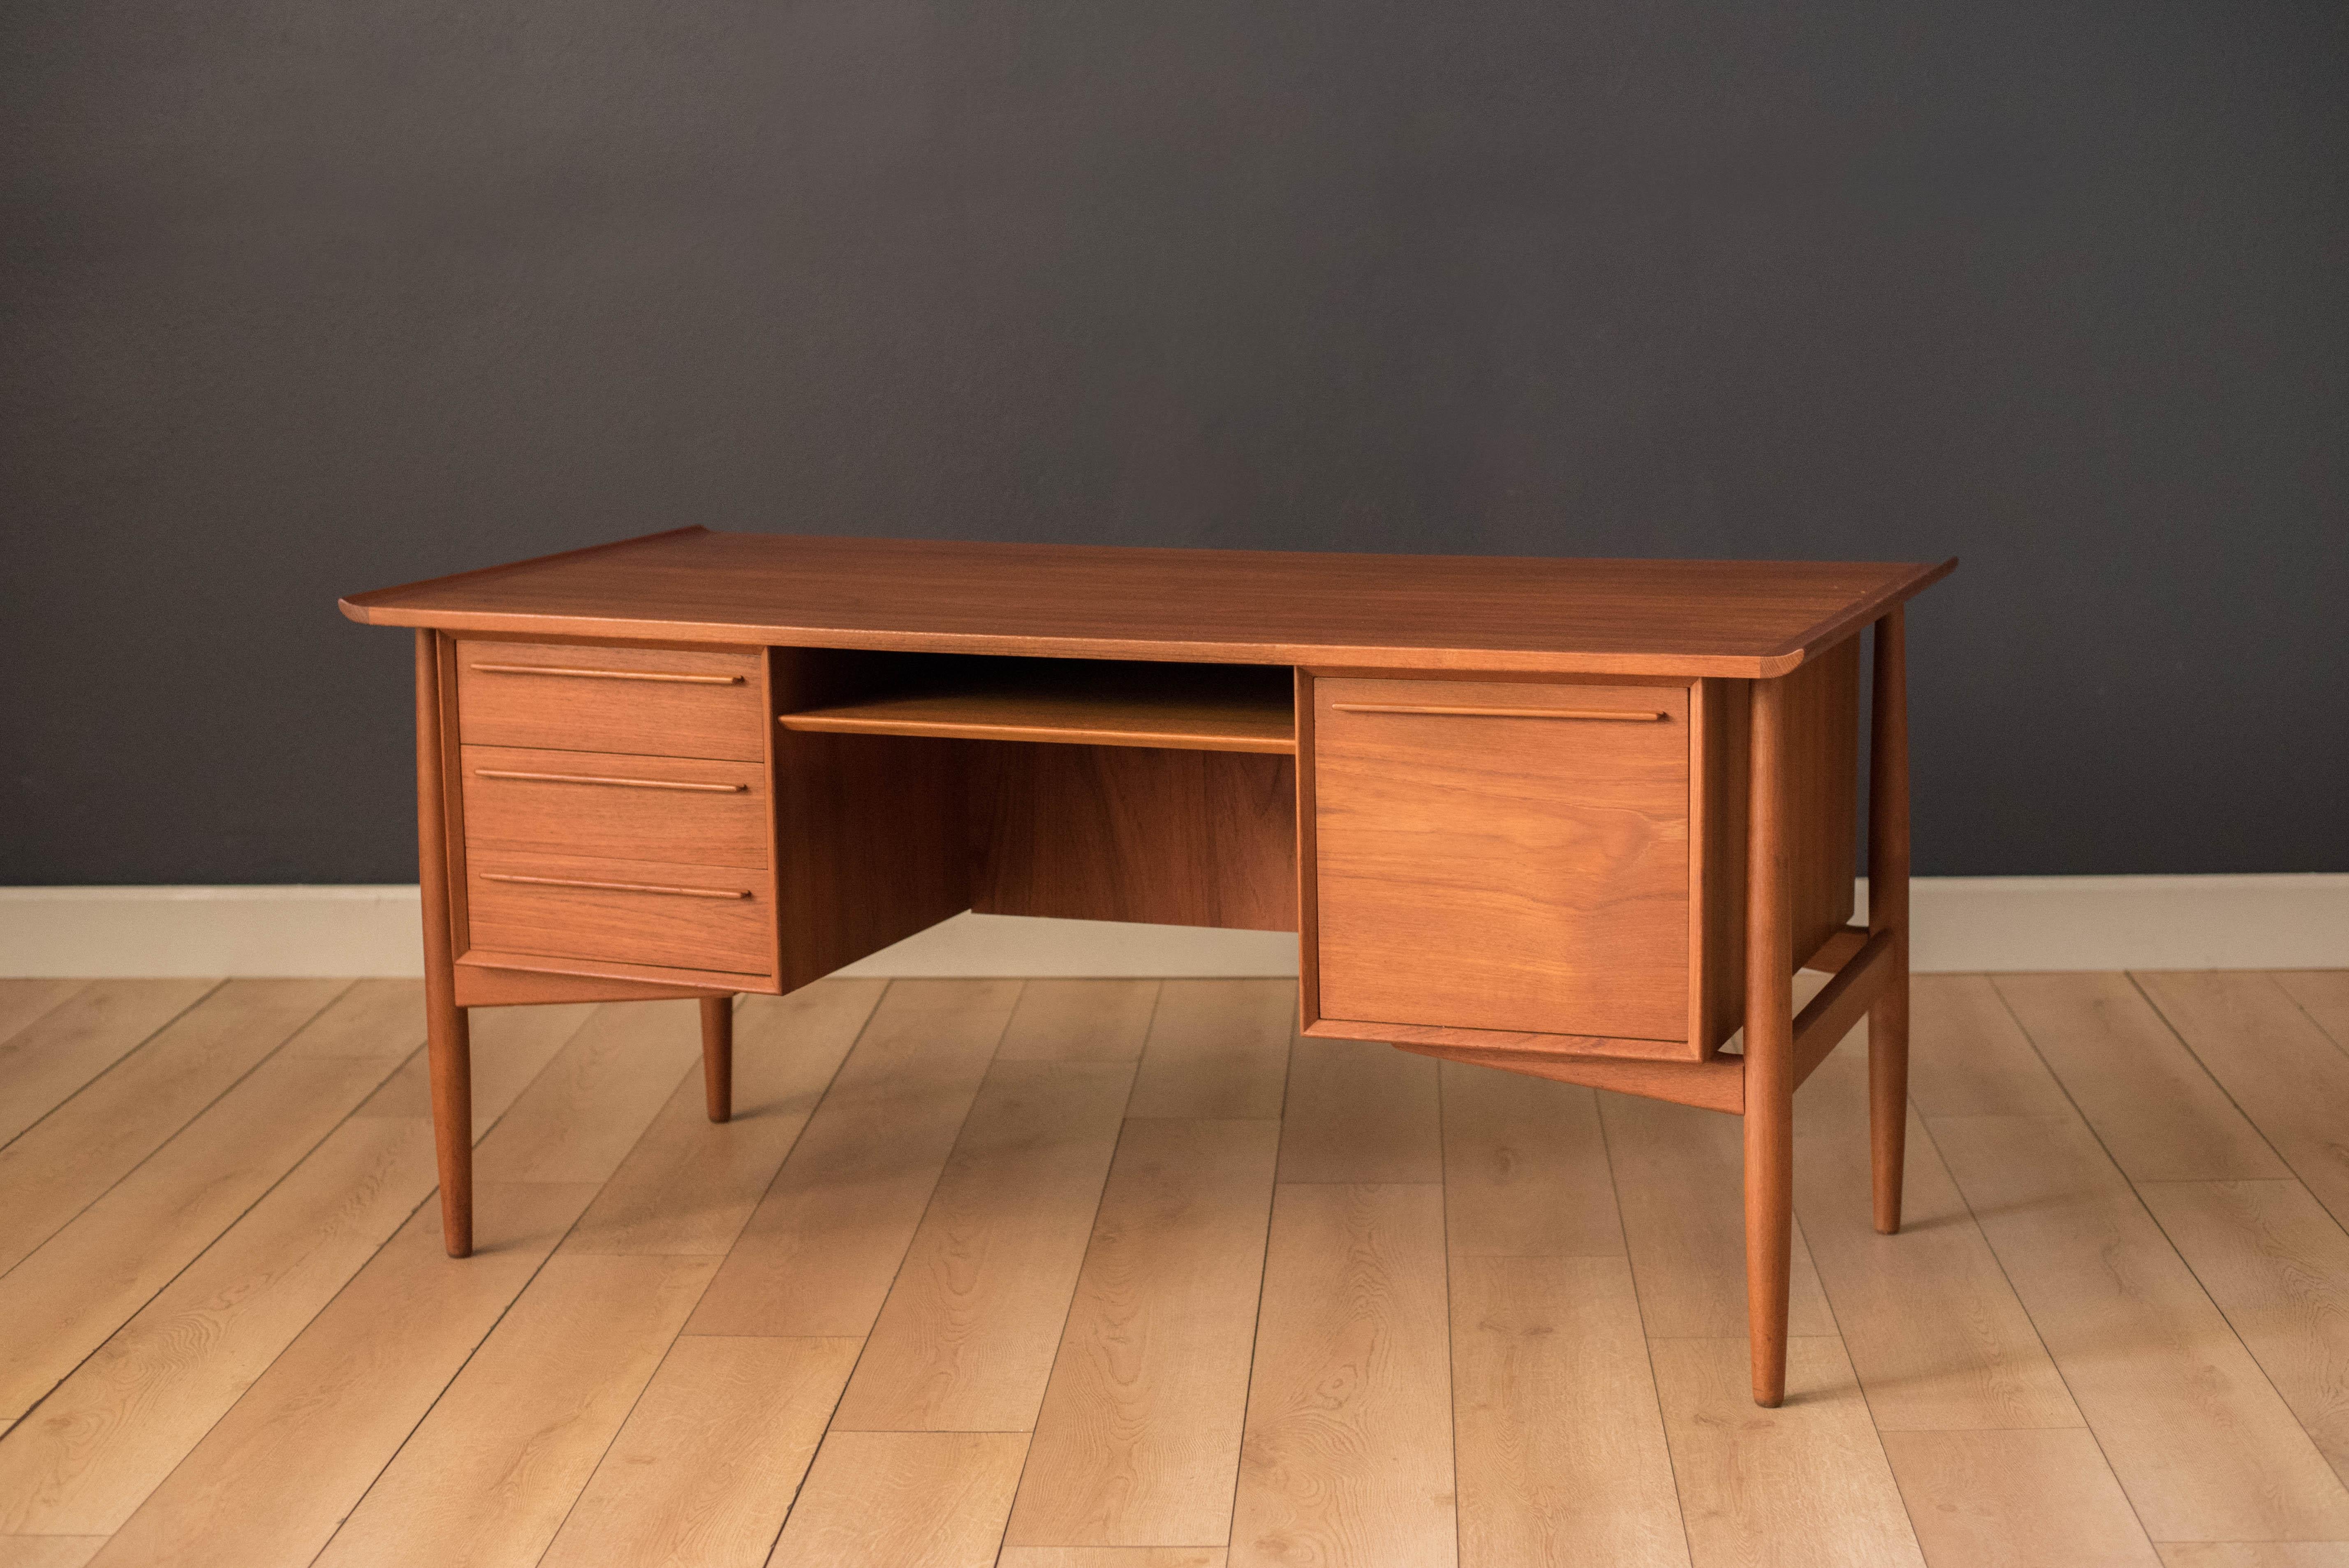 Midcentury executive desk in teak manufactured by H.P. Hansen, Denmark, circa 1960s. This piece is equipped with four dovetailed storage drawers including a filing cabinet. Features a raised sculpted top and floating external legs. This versatile